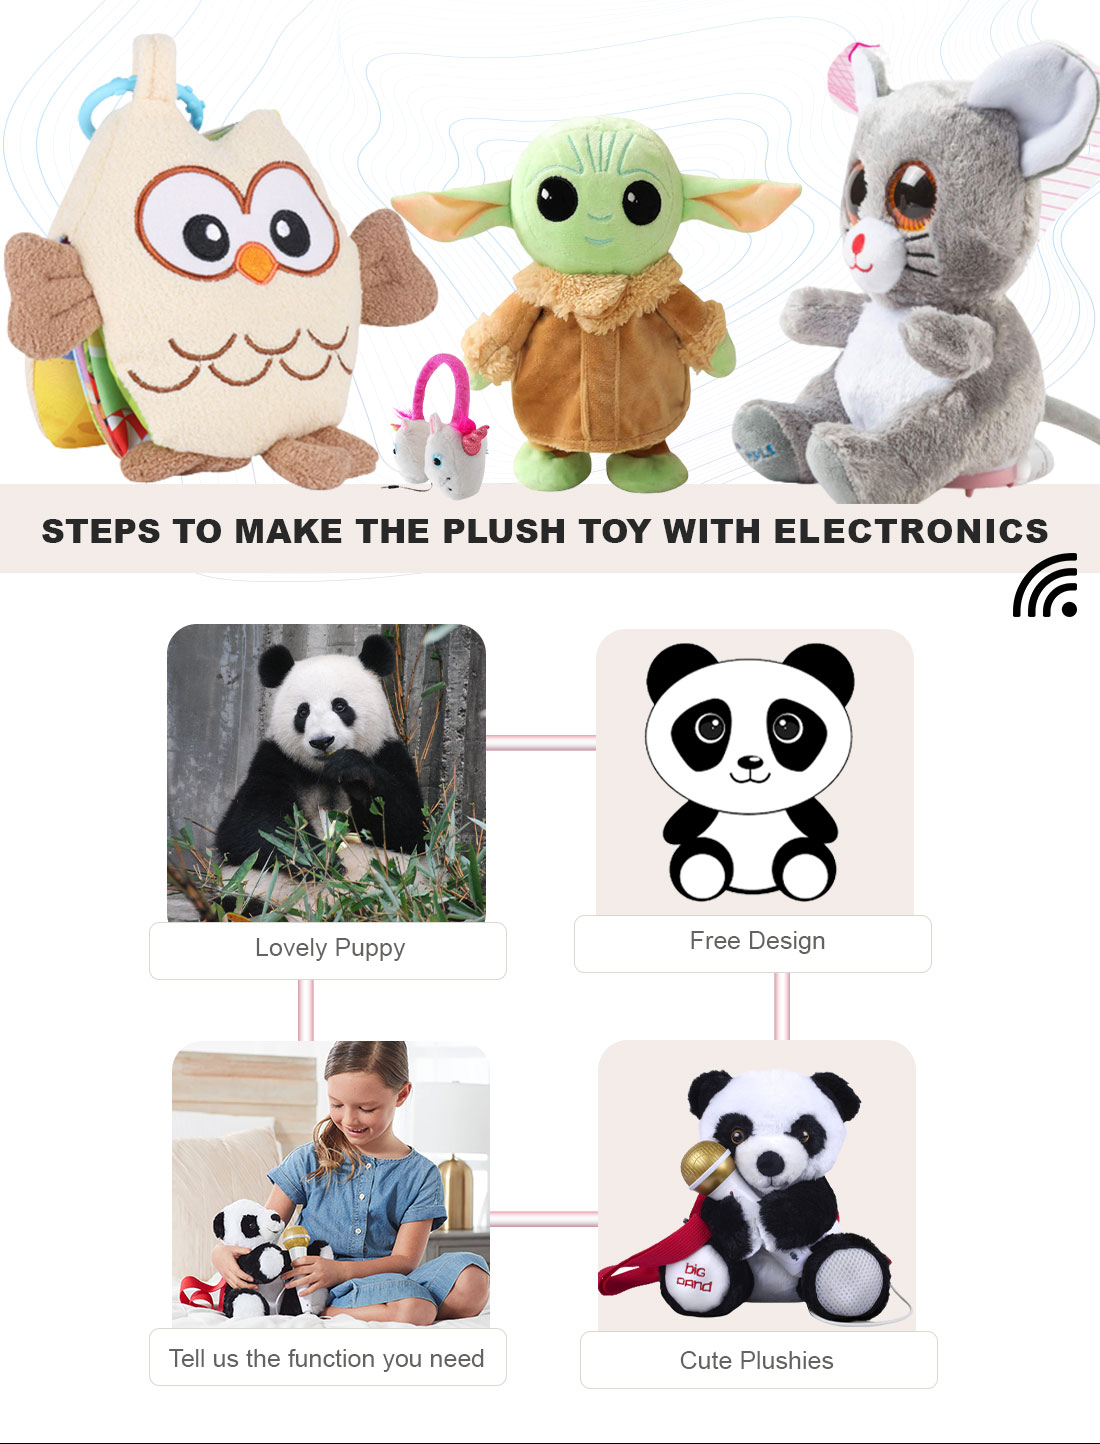 where to buy plush toy with electronics